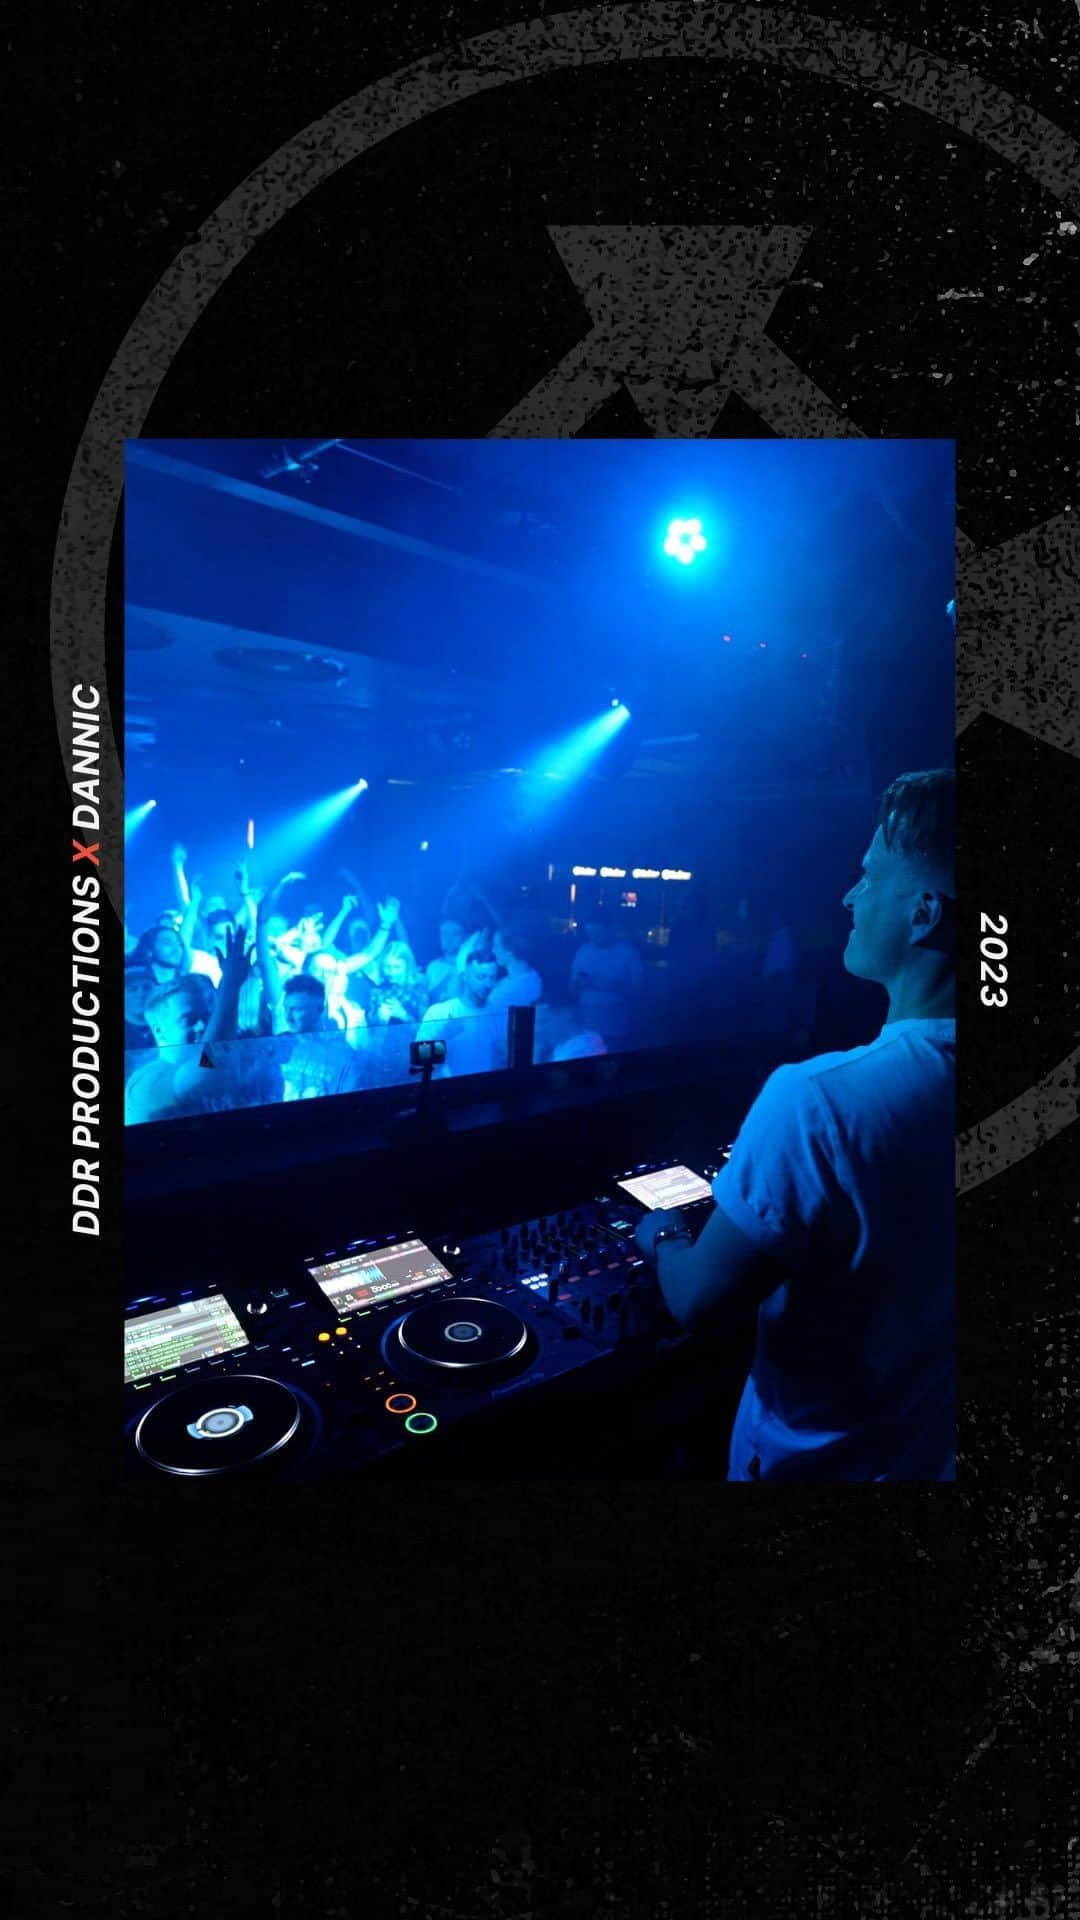 Dannicのインスタグラム：「Here’s a little snippet of the multi cam registration we’ve created of @dannic his set at @bootshaus in Cologne. 🔥🇩🇪」